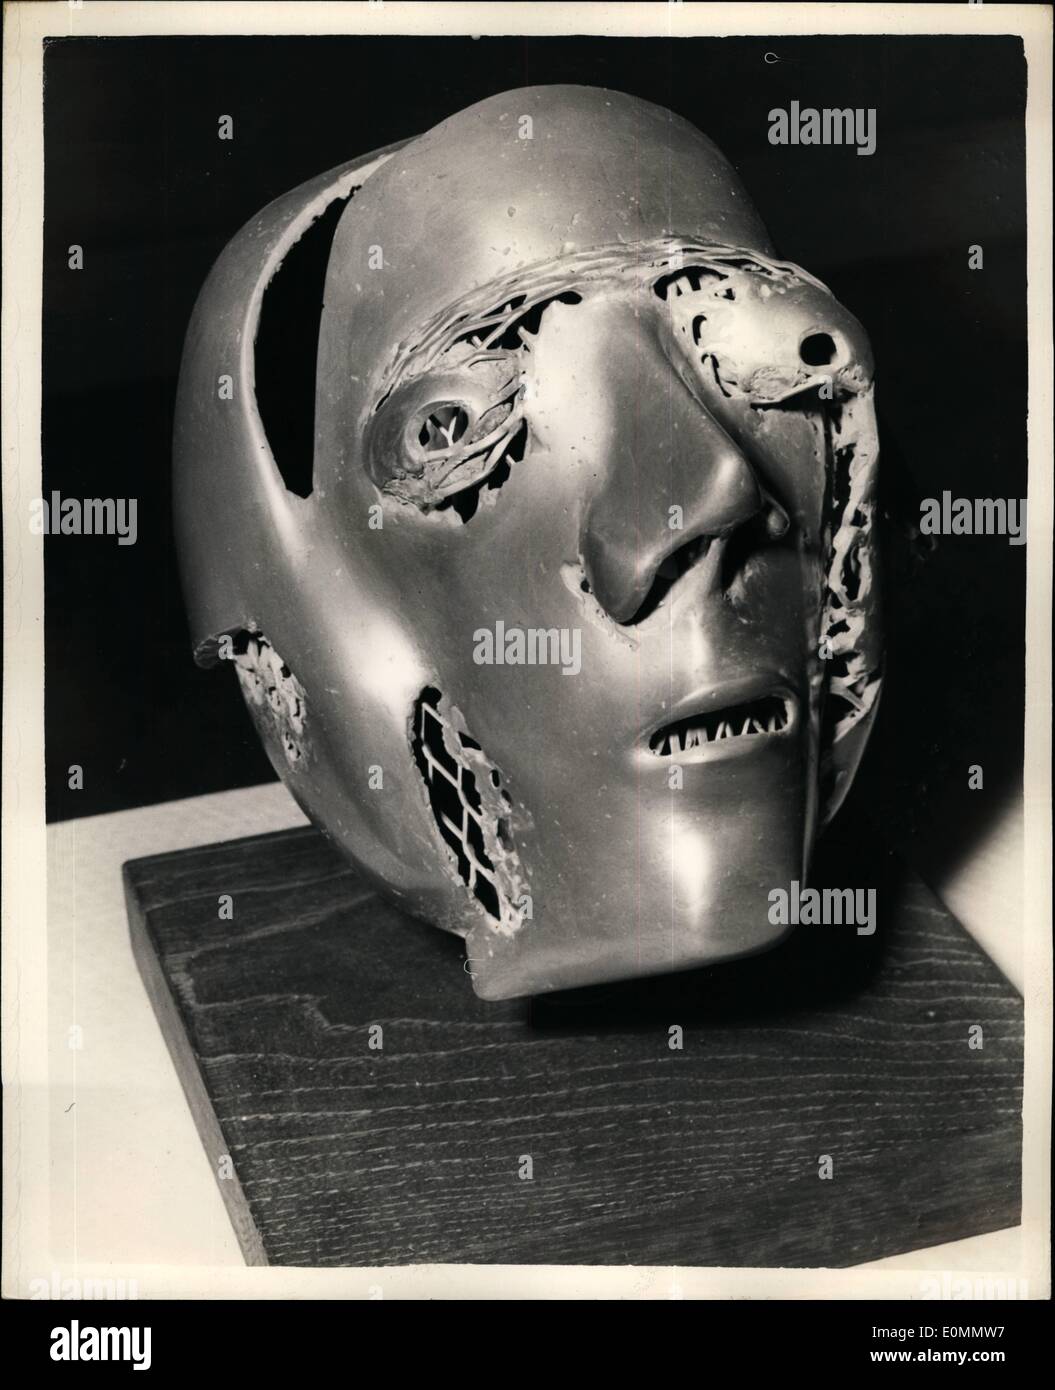 Mar. 03, 1956 - Exhibition by the Australian Artists Association. Photo shows Visor Head, by Oliffe Richmond, one of the exhibits in the Exhibition by the Australian Artists Association which opens today at the Imperial Institute Art Gallery. Stock Photo